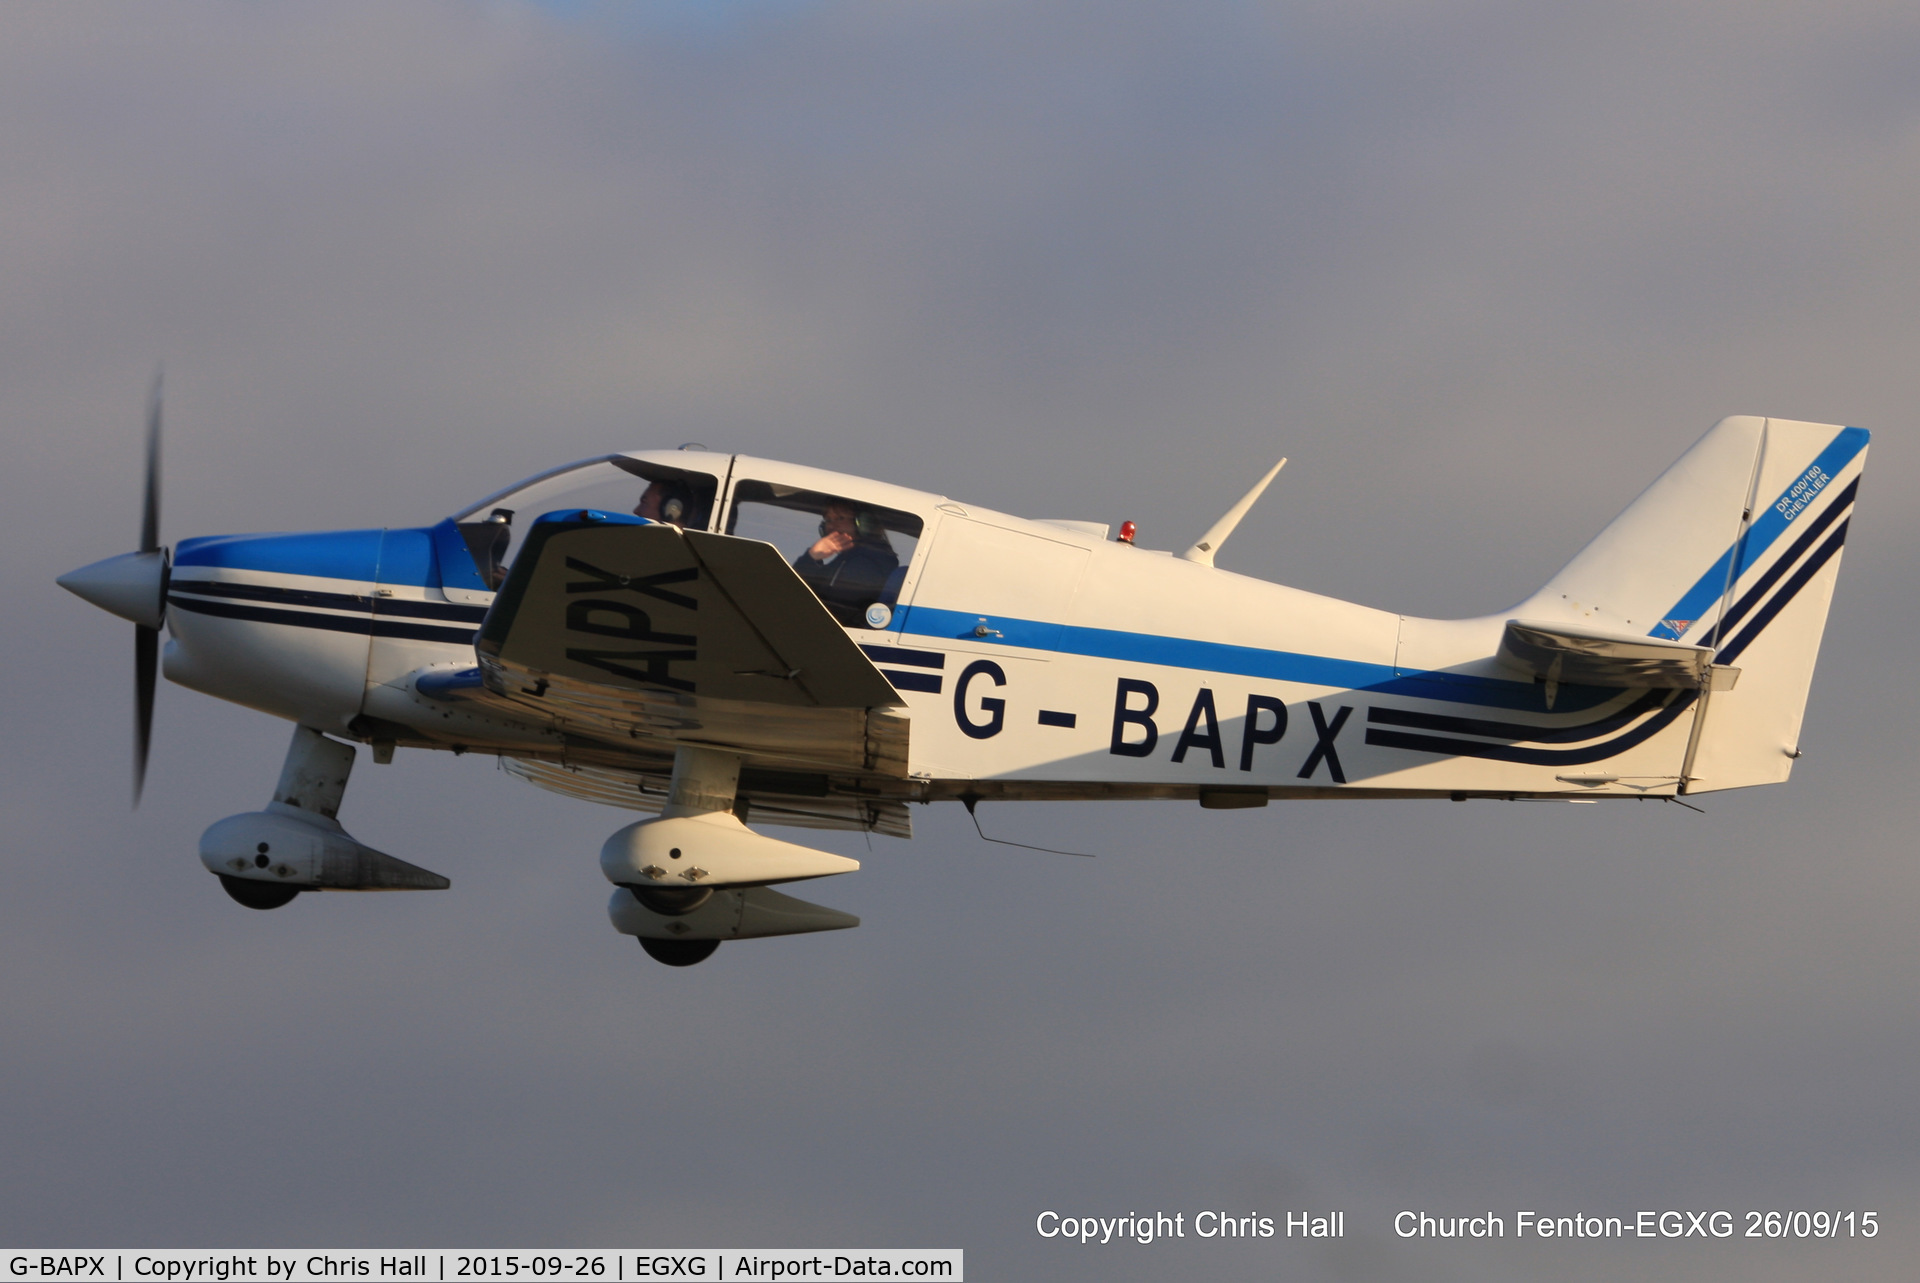 G-BAPX, 1972 Robin DR-400-160 Chevalier C/N 789, at the Yorkshire Airshow